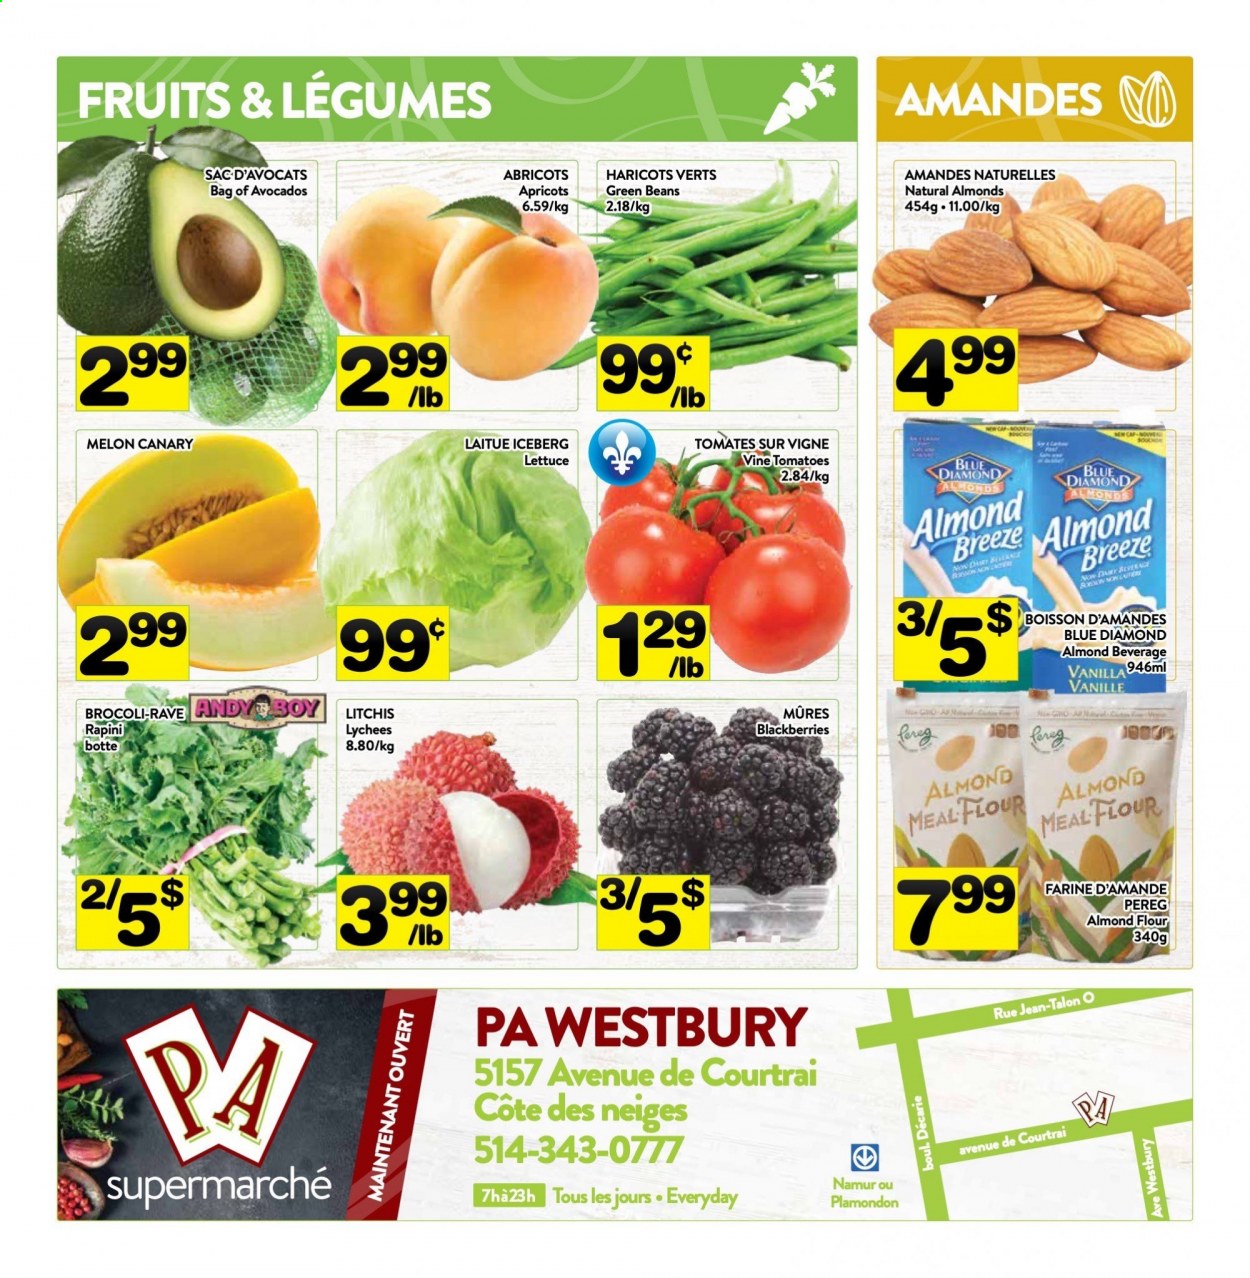 thumbnail - PA Supermarché Flyer - May 24, 2021 - May 30, 2021 - Sales products - beans, green beans, lettuce, avocado, blackberries, melons, apricots, Almond Breeze, almond meal, flour, almond flour, Blue Diamond. Page 8.